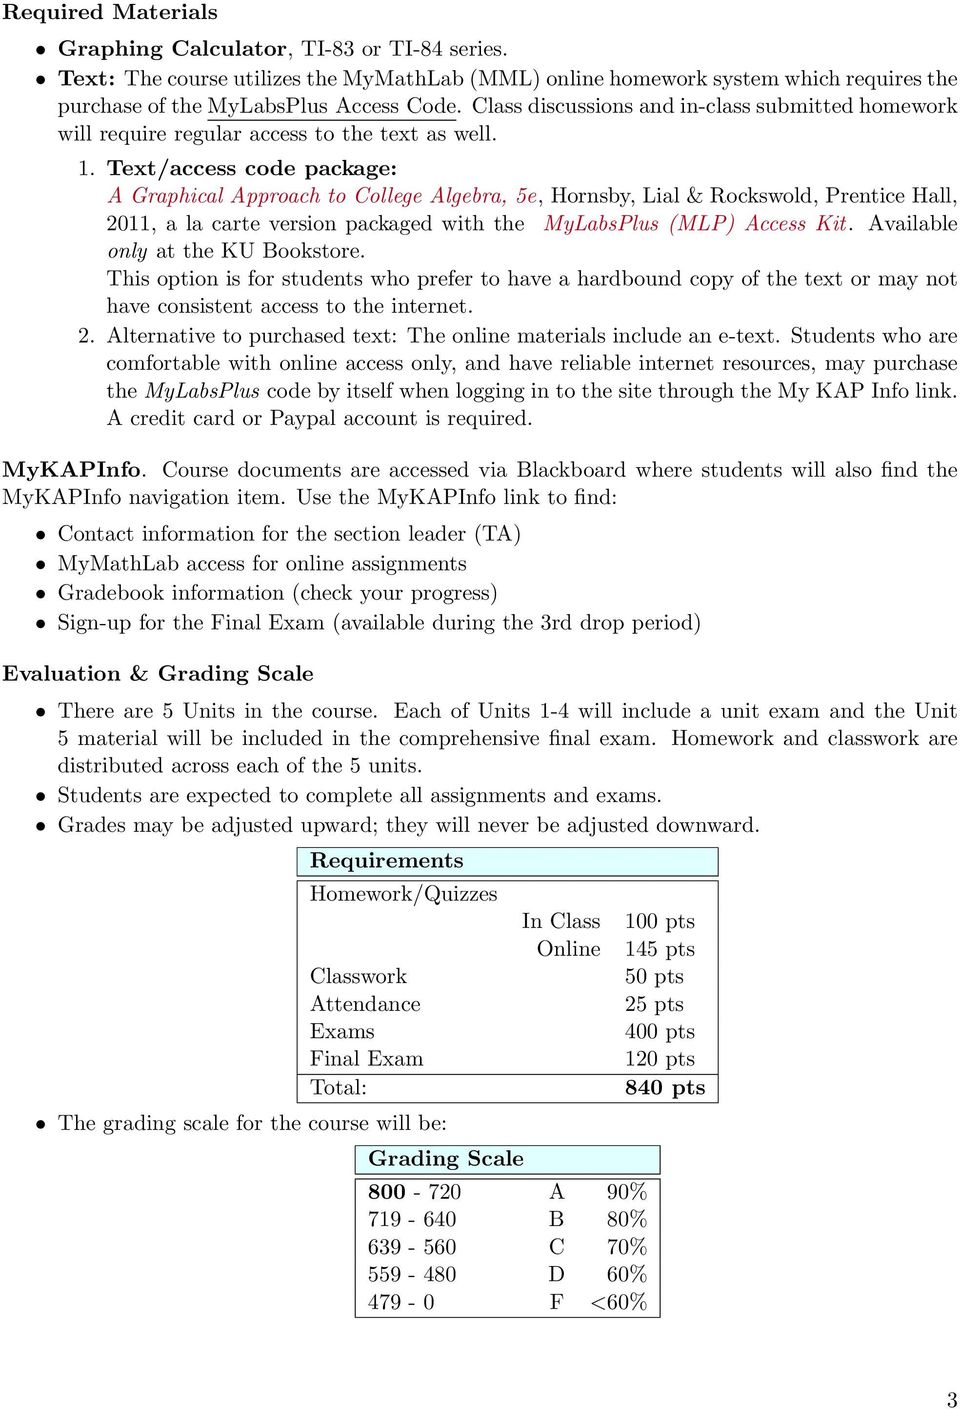 Text/access code package: A Graphical Approach to College Algebra, 5e, Hornsby, Lial & Rockswold, Prentice Hall, 2011, a la carte version packaged with the MyLabsPlus (MLP) Access Kit.